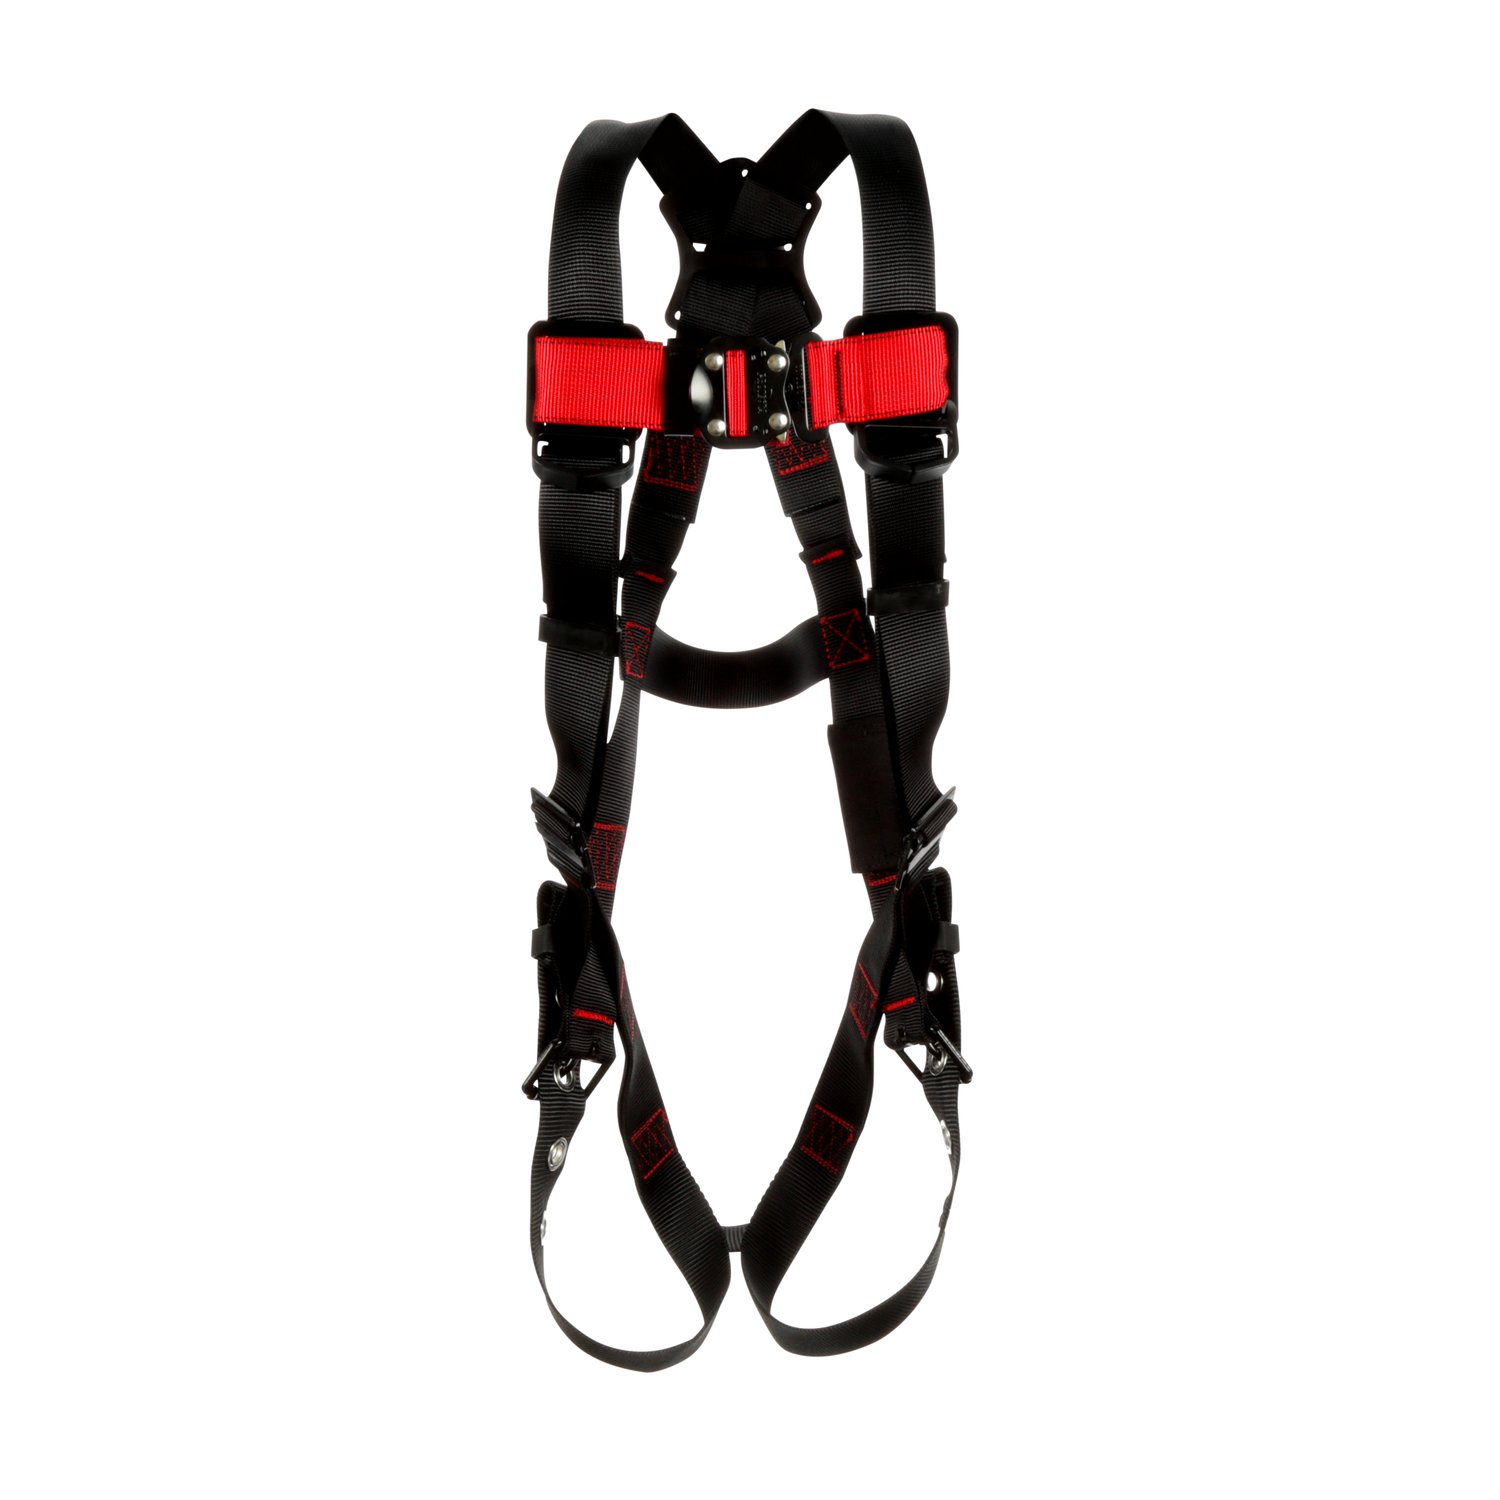 7012816741 - 3M Protecta P200 Vest Safety Harness 1161501, Small